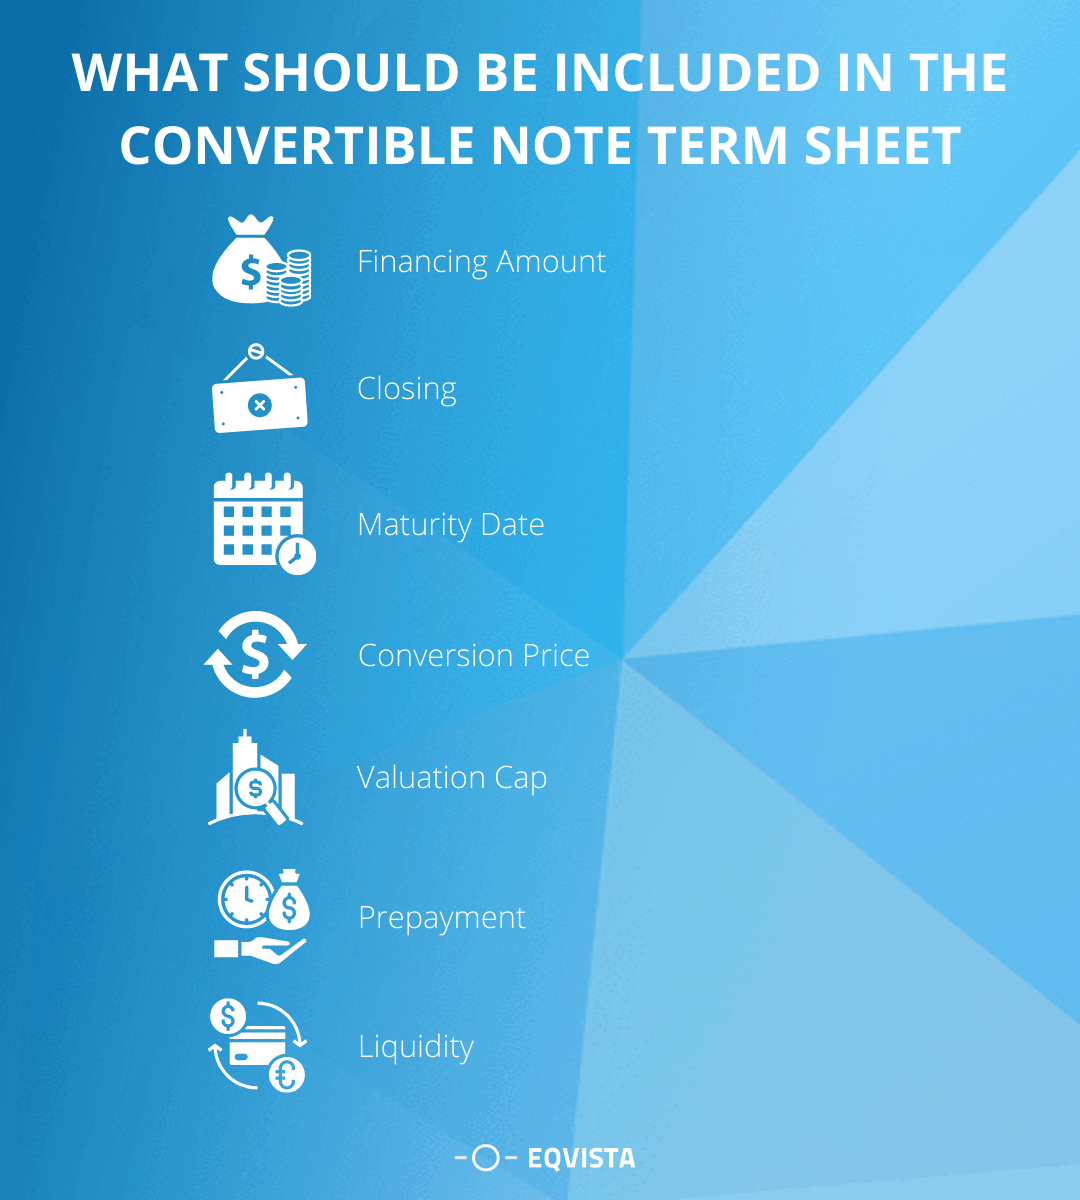 What Should be Included in the Convertible Note Term Sheet?